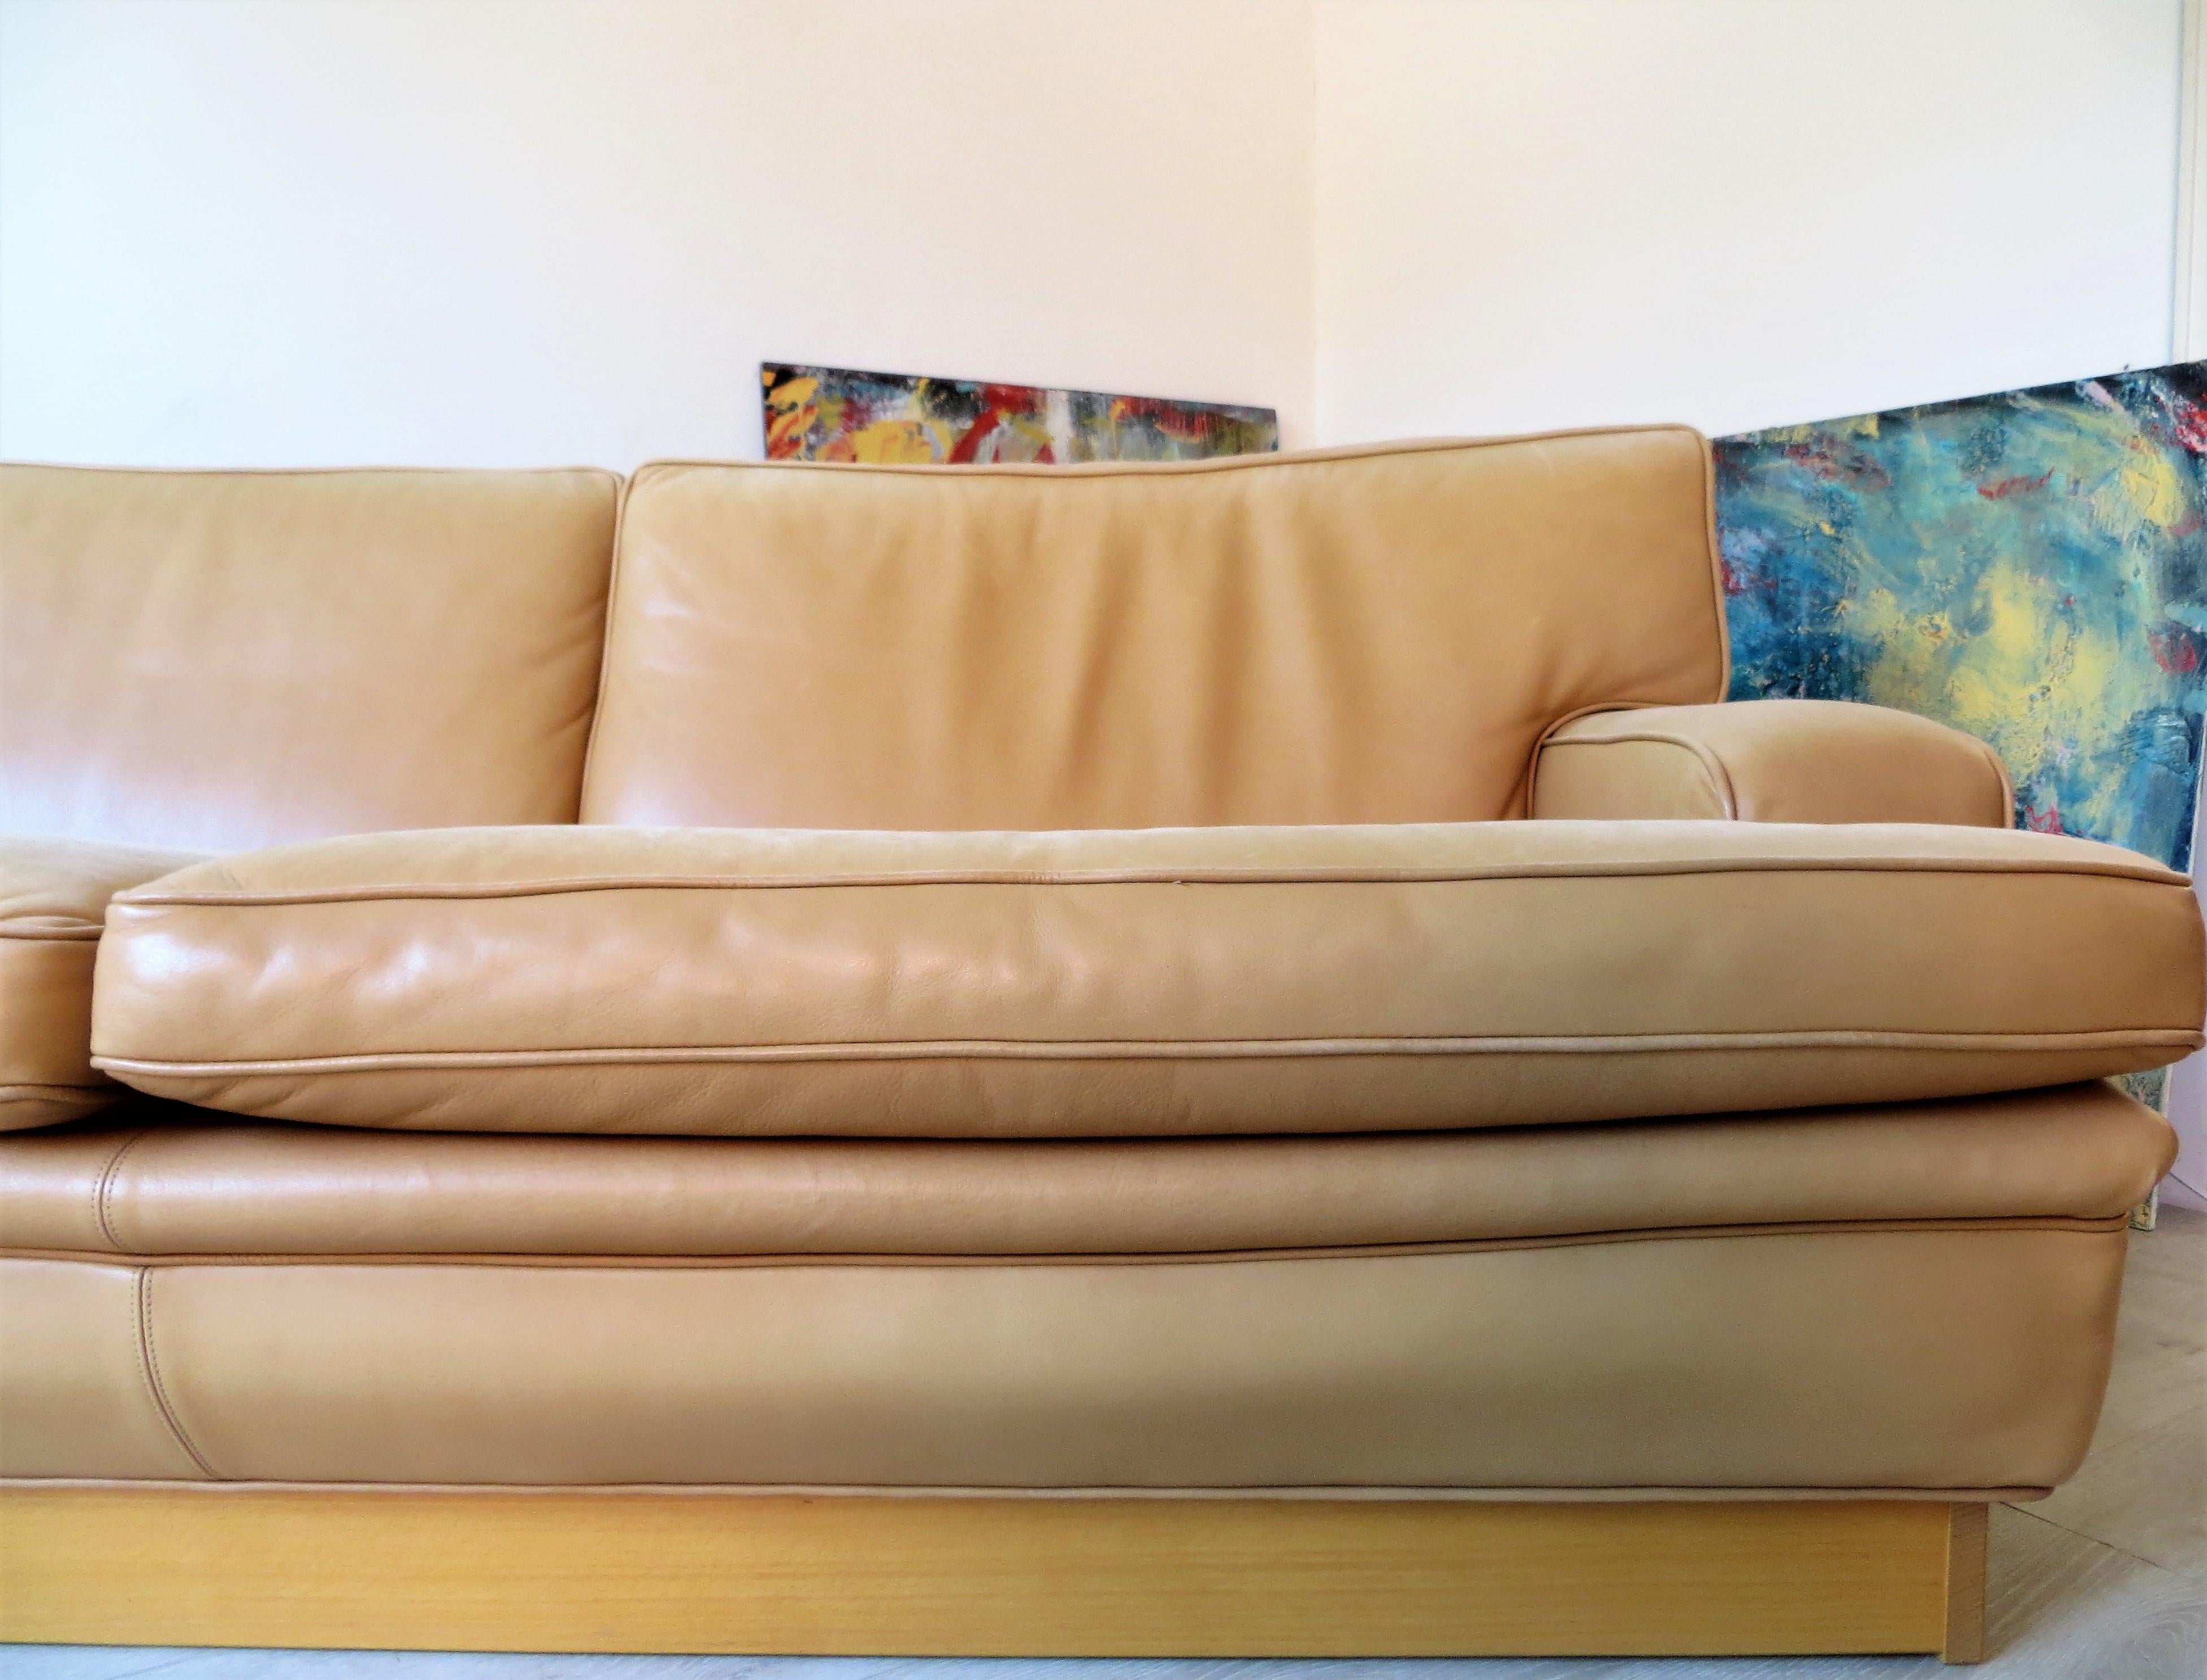 Arne Norell Vintage Leather Merkur Sofa Loveseat in Butterscotch Brown , 1960s For Sale 2